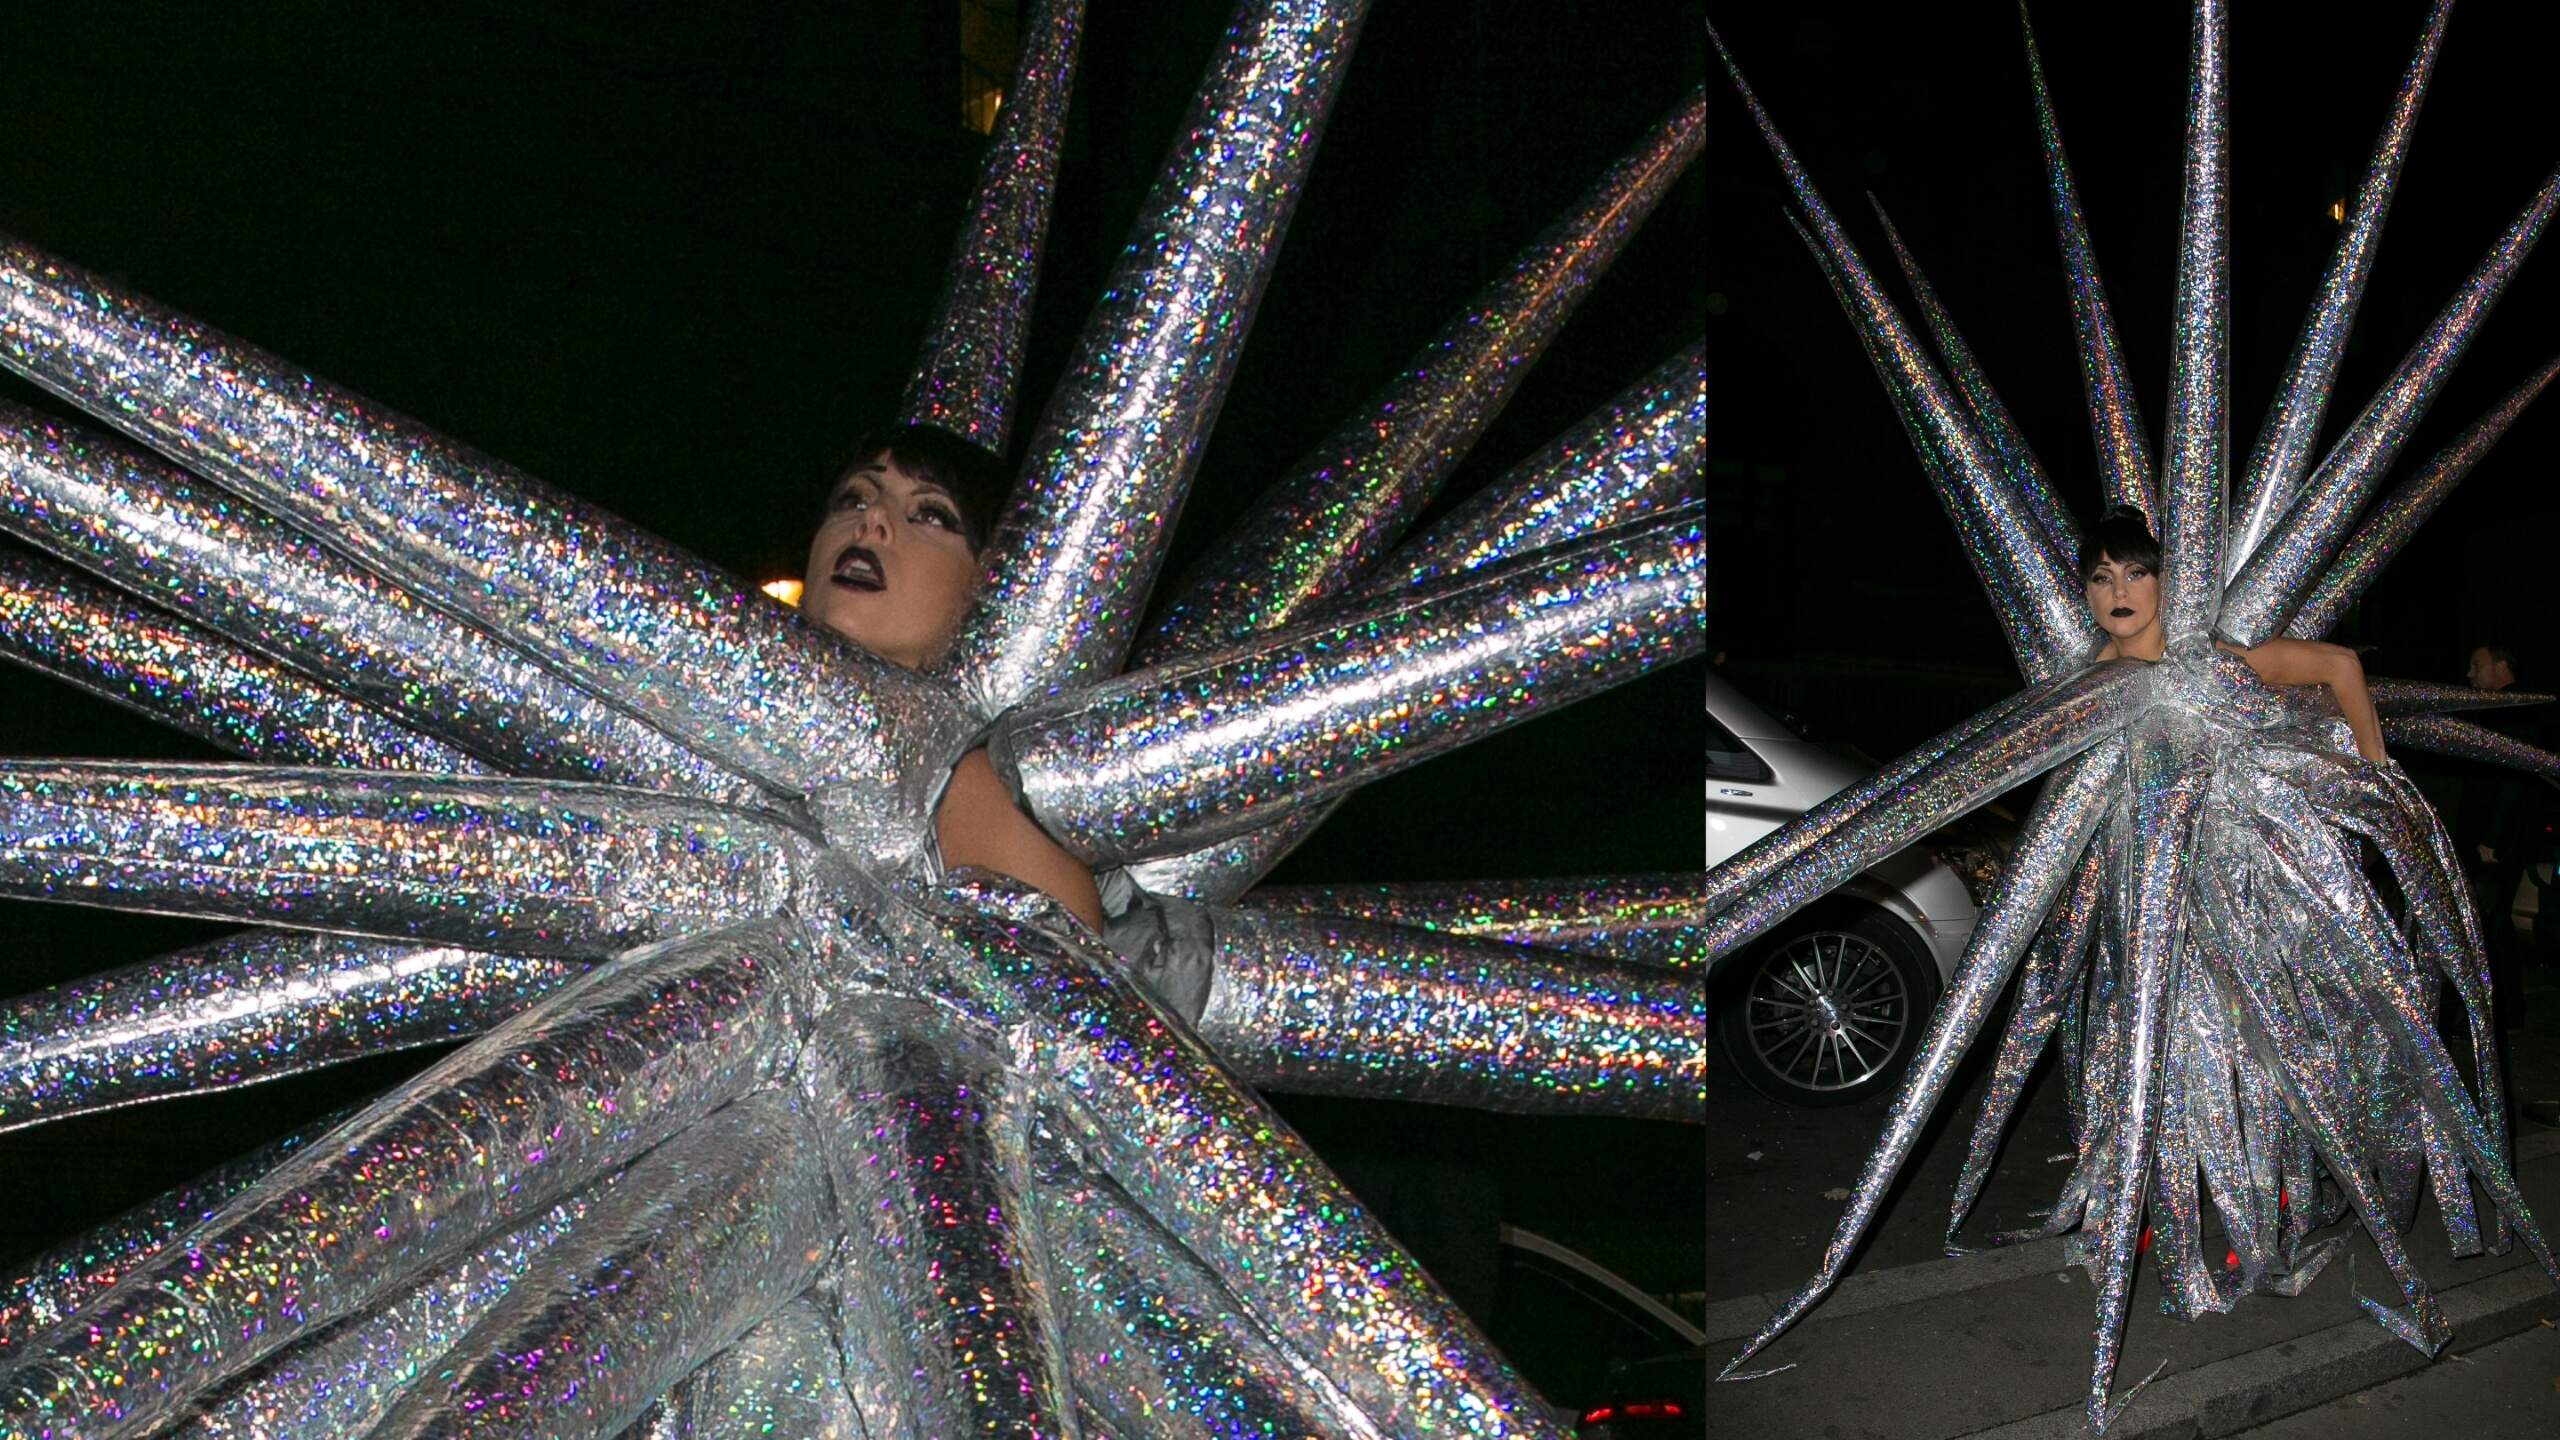 Singer Lady Gaga arrives at the 'VIP ROOM' Club wearing a giant chrome spiky outfit